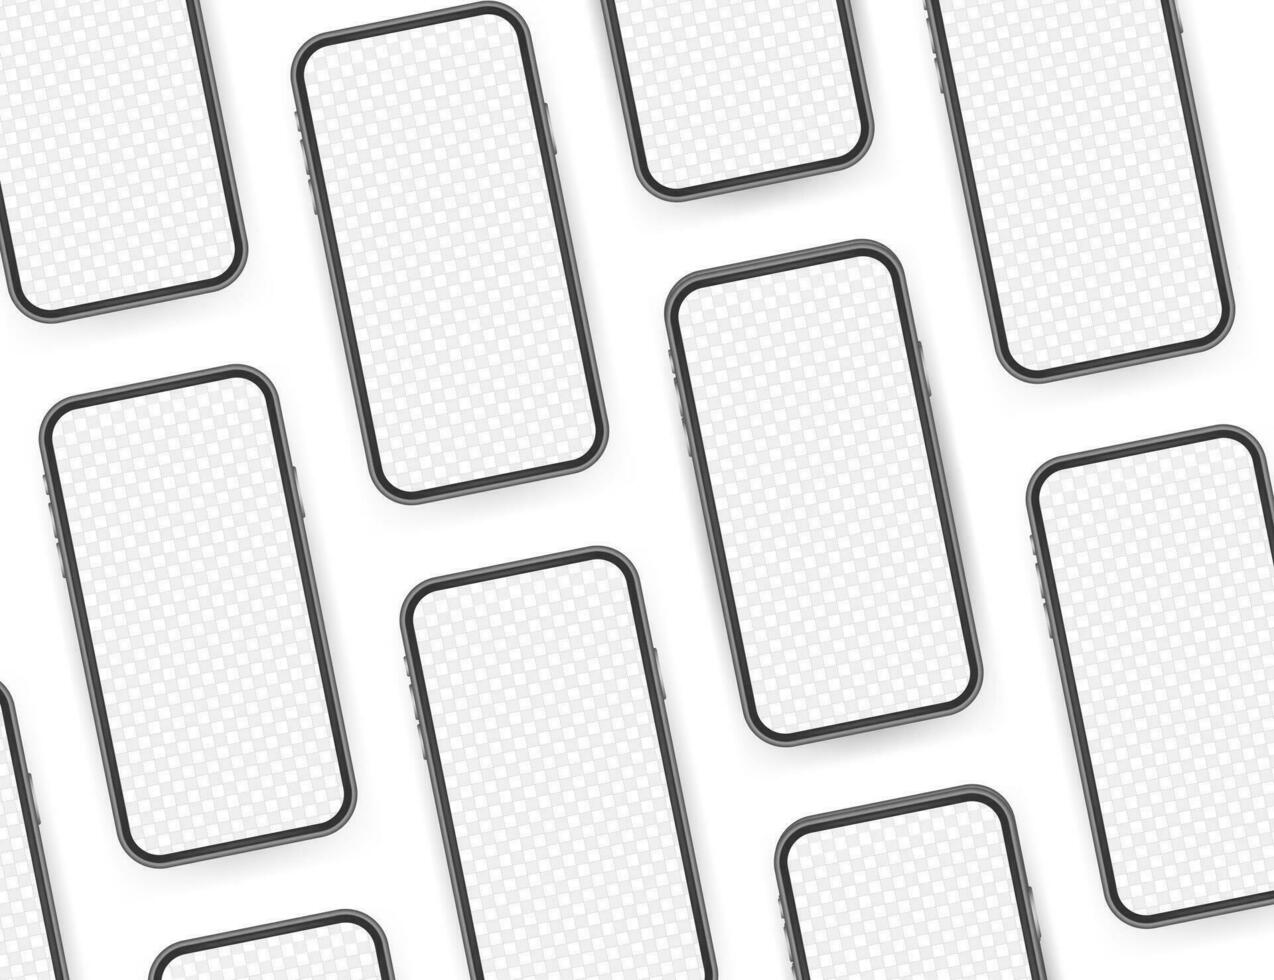 Smartphone mockup. Cellphone frame with blank display isolated templates. Vector stock illustration